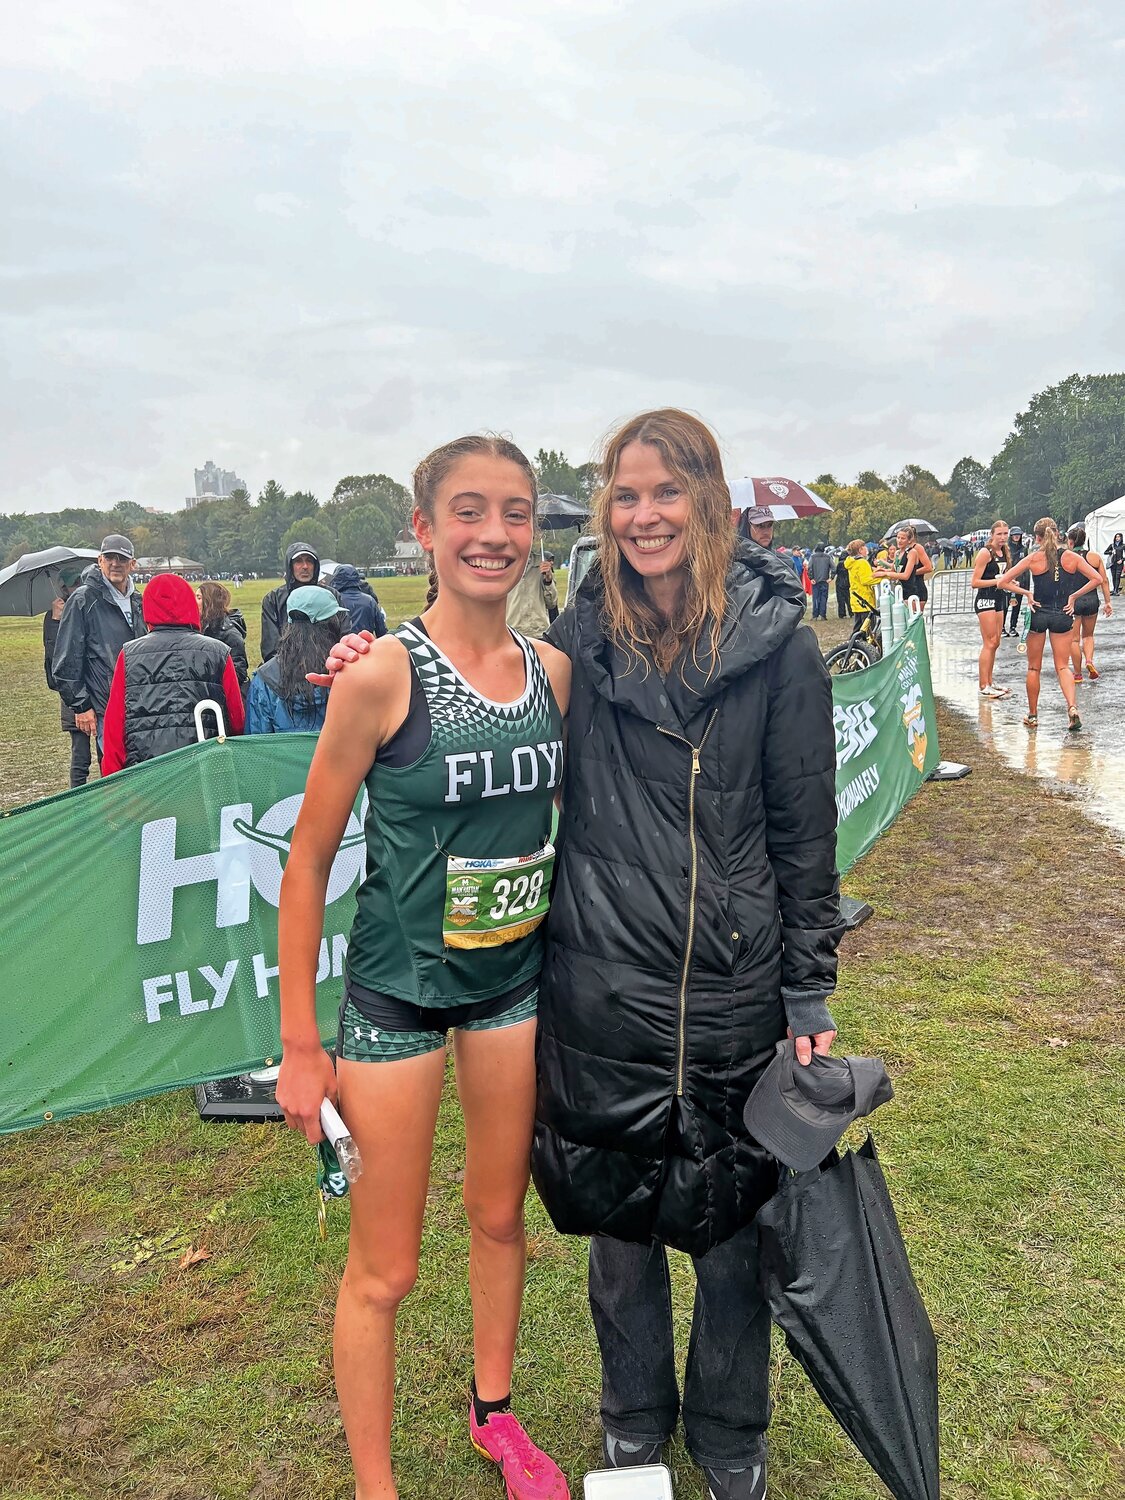 Zariel Macchia of William Floyd High School emerged victorious in the Girls Eastern States Championship. After the race, Macchia was joined by 1981 winner Christine Curtin, who was also inducted into the Van Cortlandt Park Cross Country Hall of Fame at the meet.